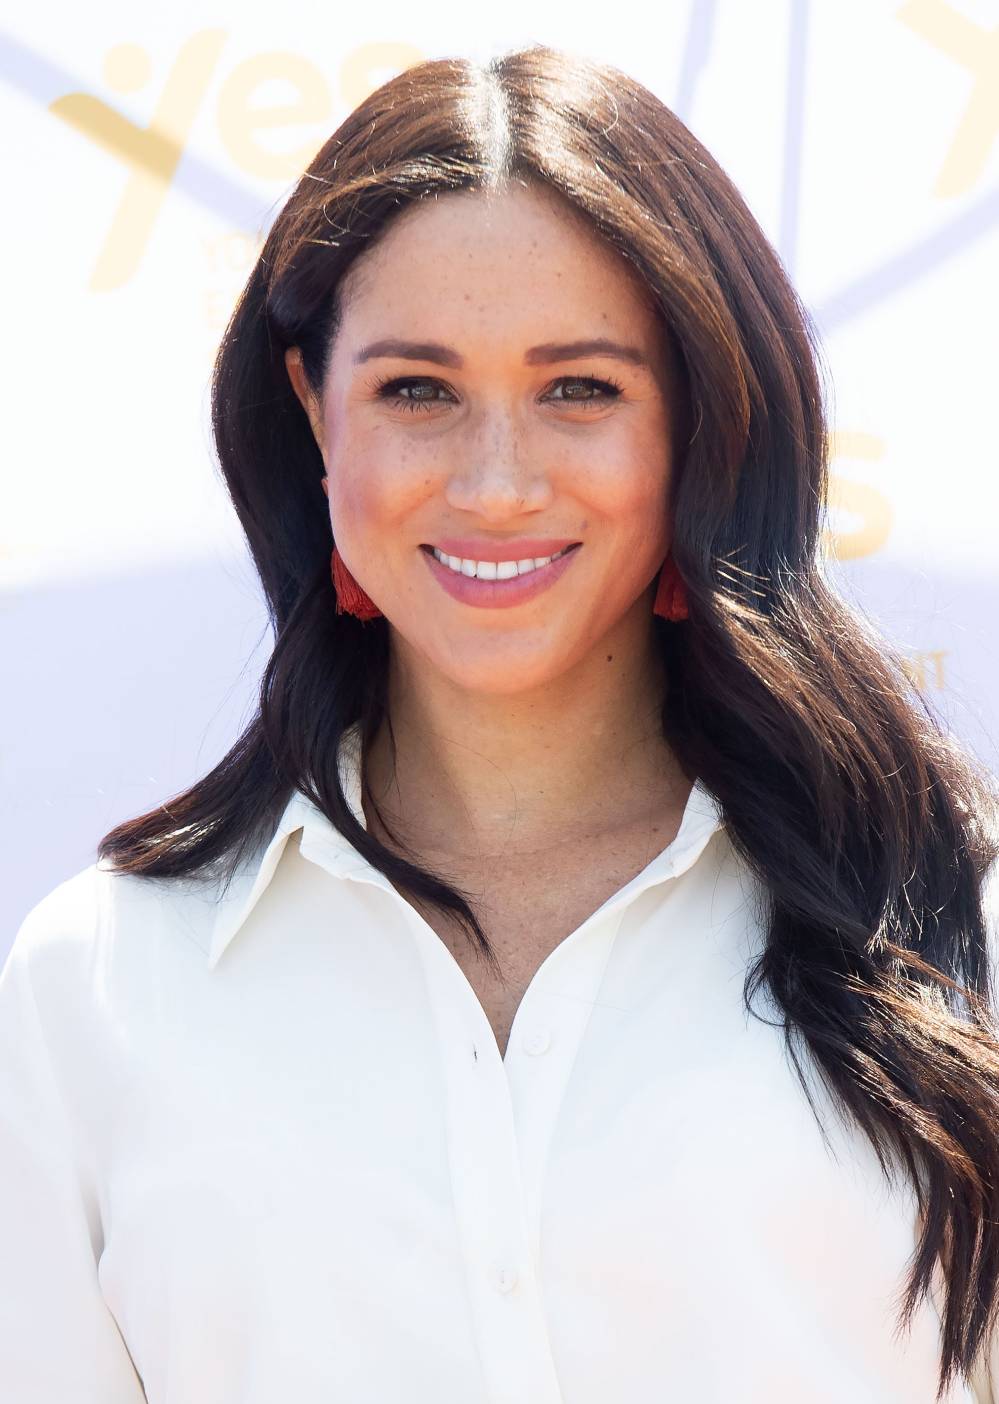 Meghan Markle "Deal Or No Deal" Briefcase Up For Auction